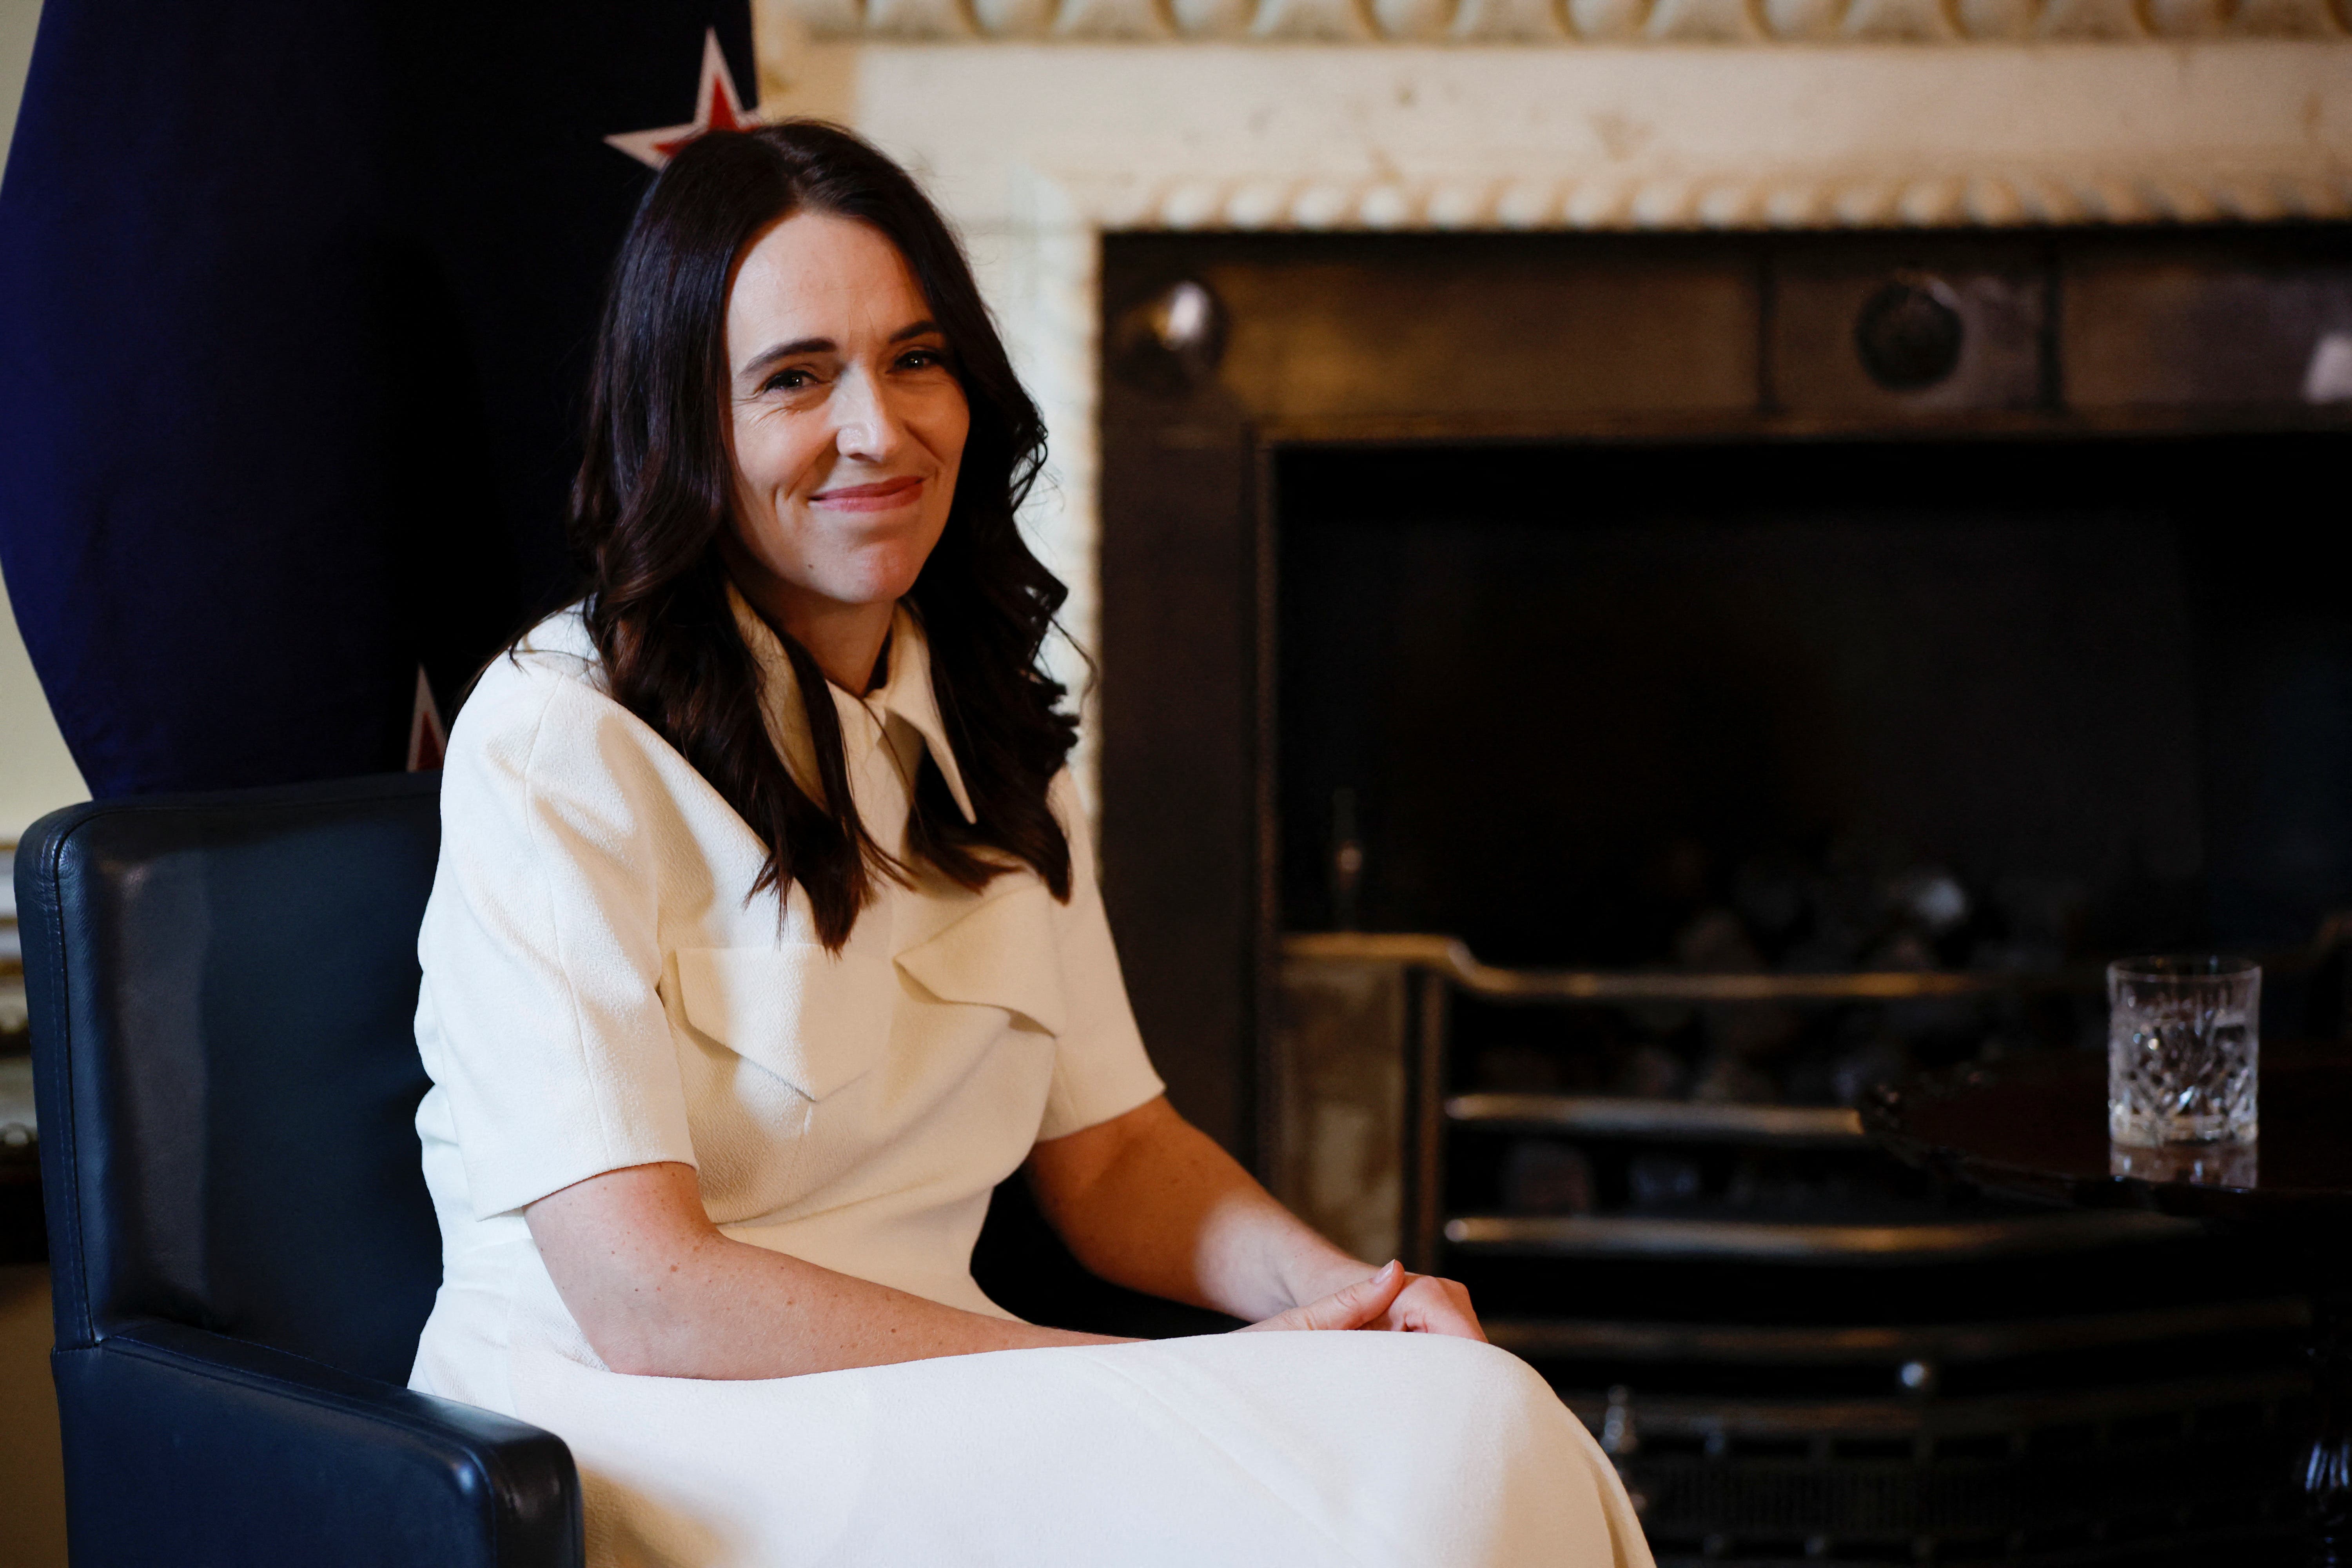 Prime Minister of New Zealand Jacinda Ardern, is stepping down